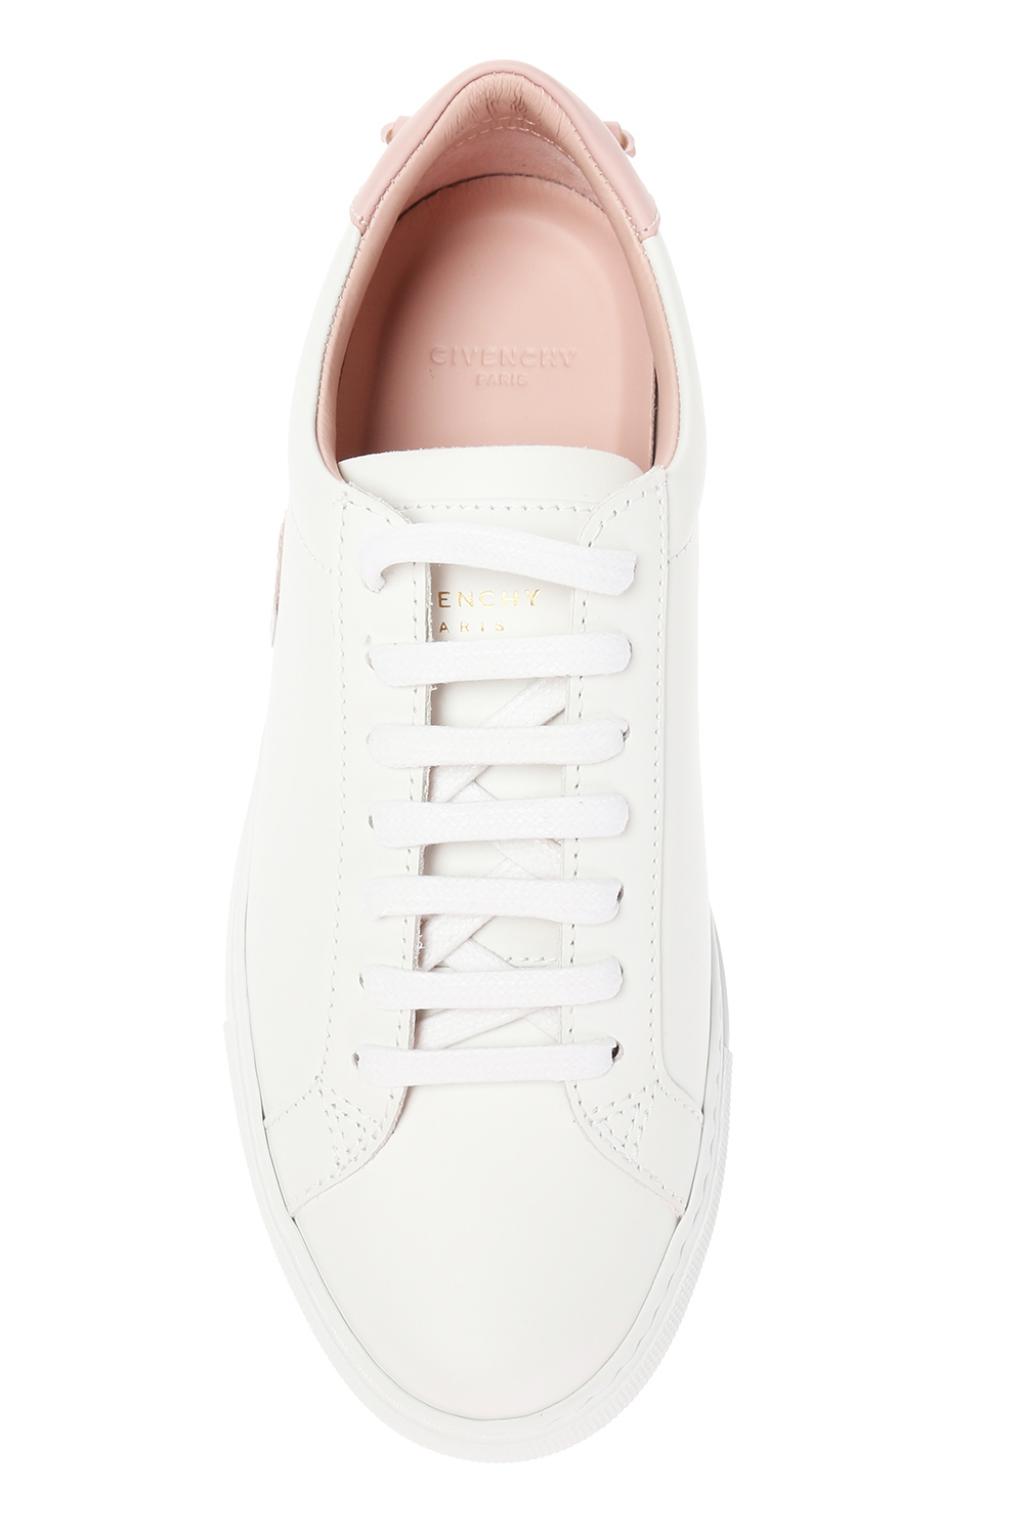 Givenchy 'Urban Street' sport shoes with a logo | Women's Shoes | Vitkac